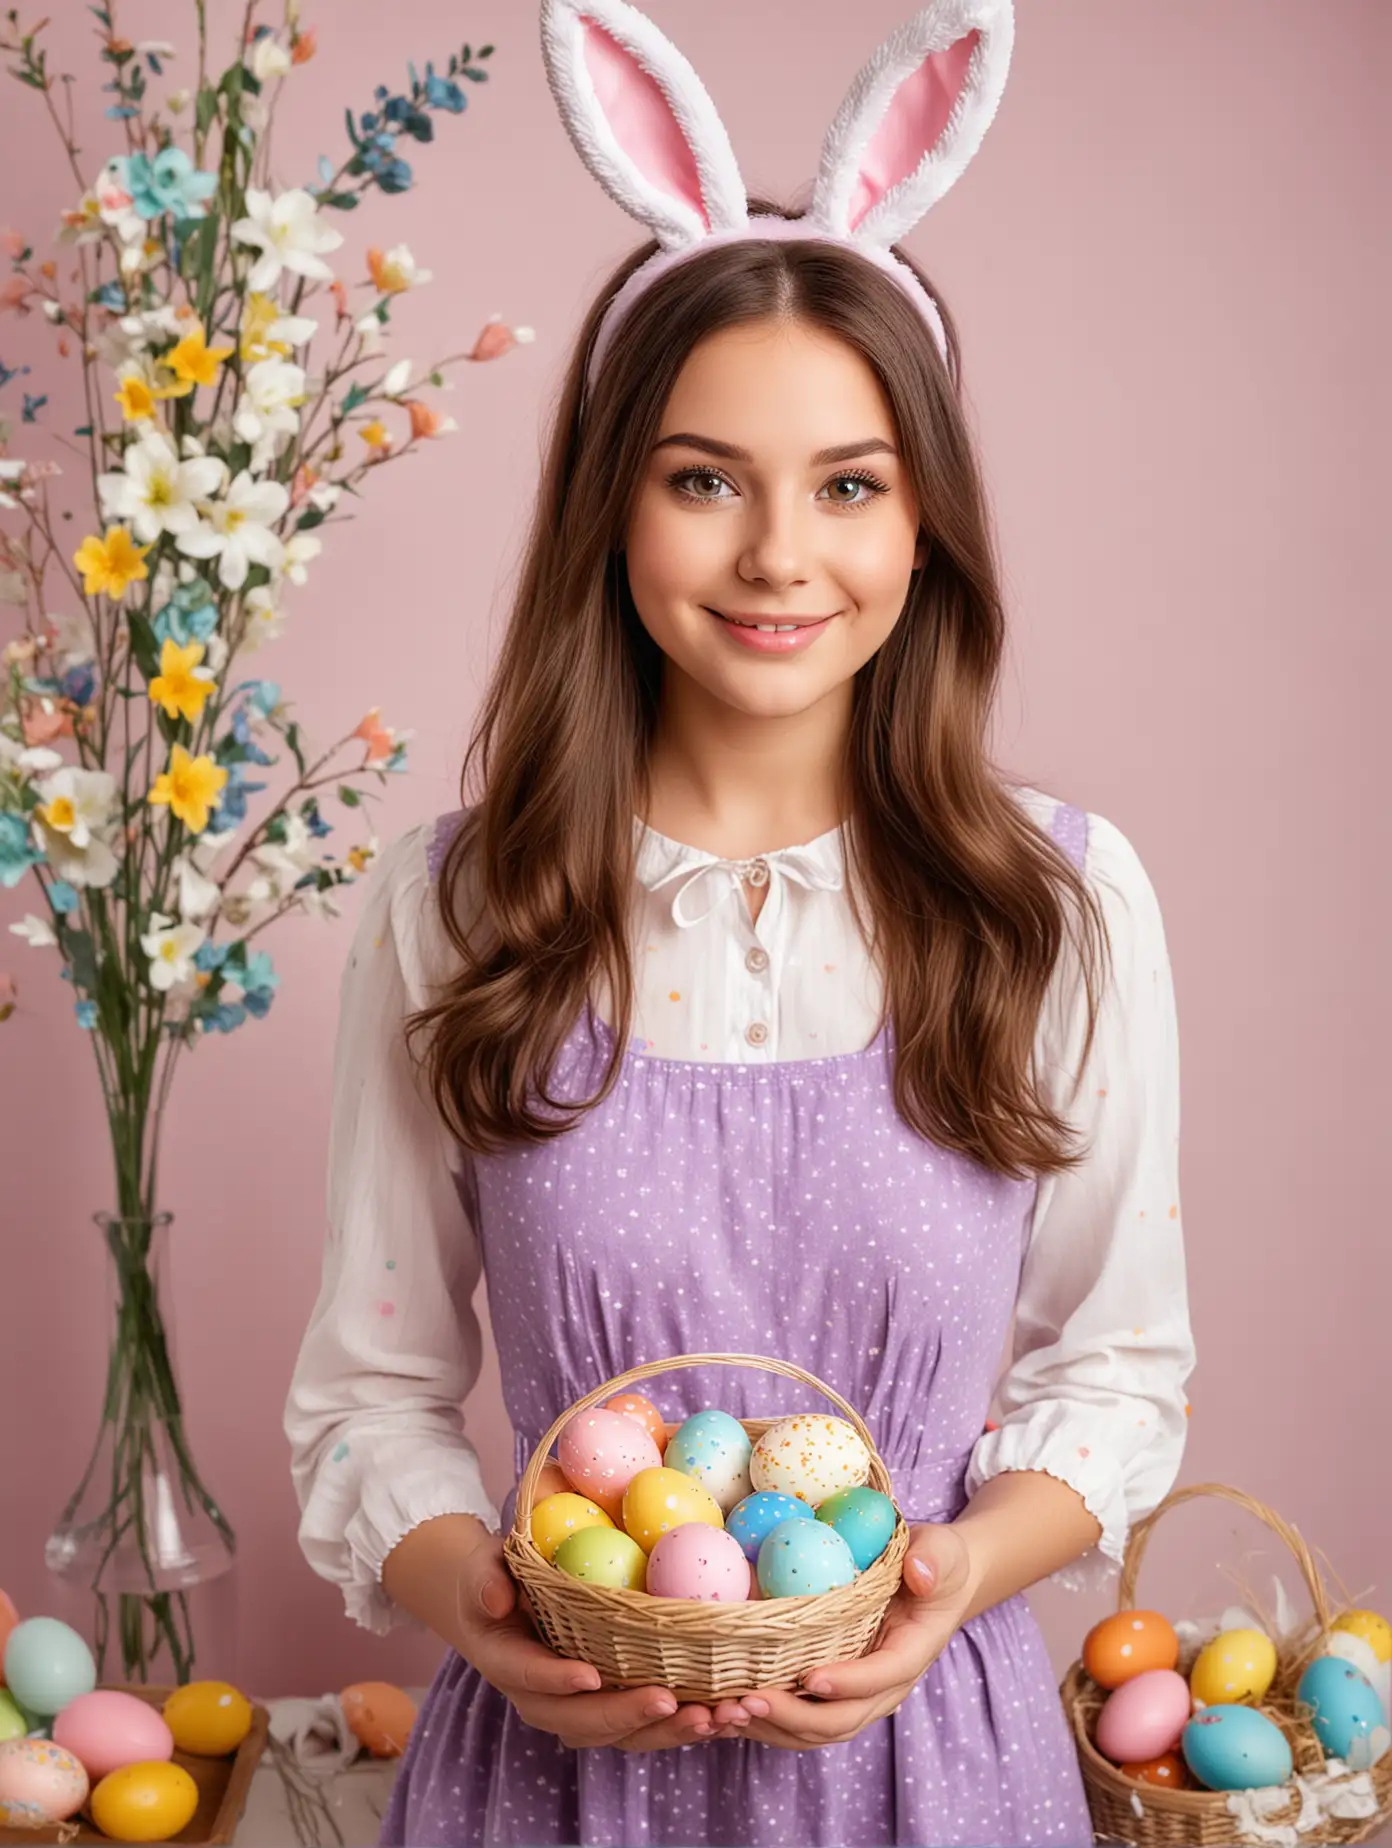 A 25-year-old American girl celebrates Easter with a strong festive atmosphere, Easter decoration background, camera facing, exquisite facial features, professional photography technology, full body photo